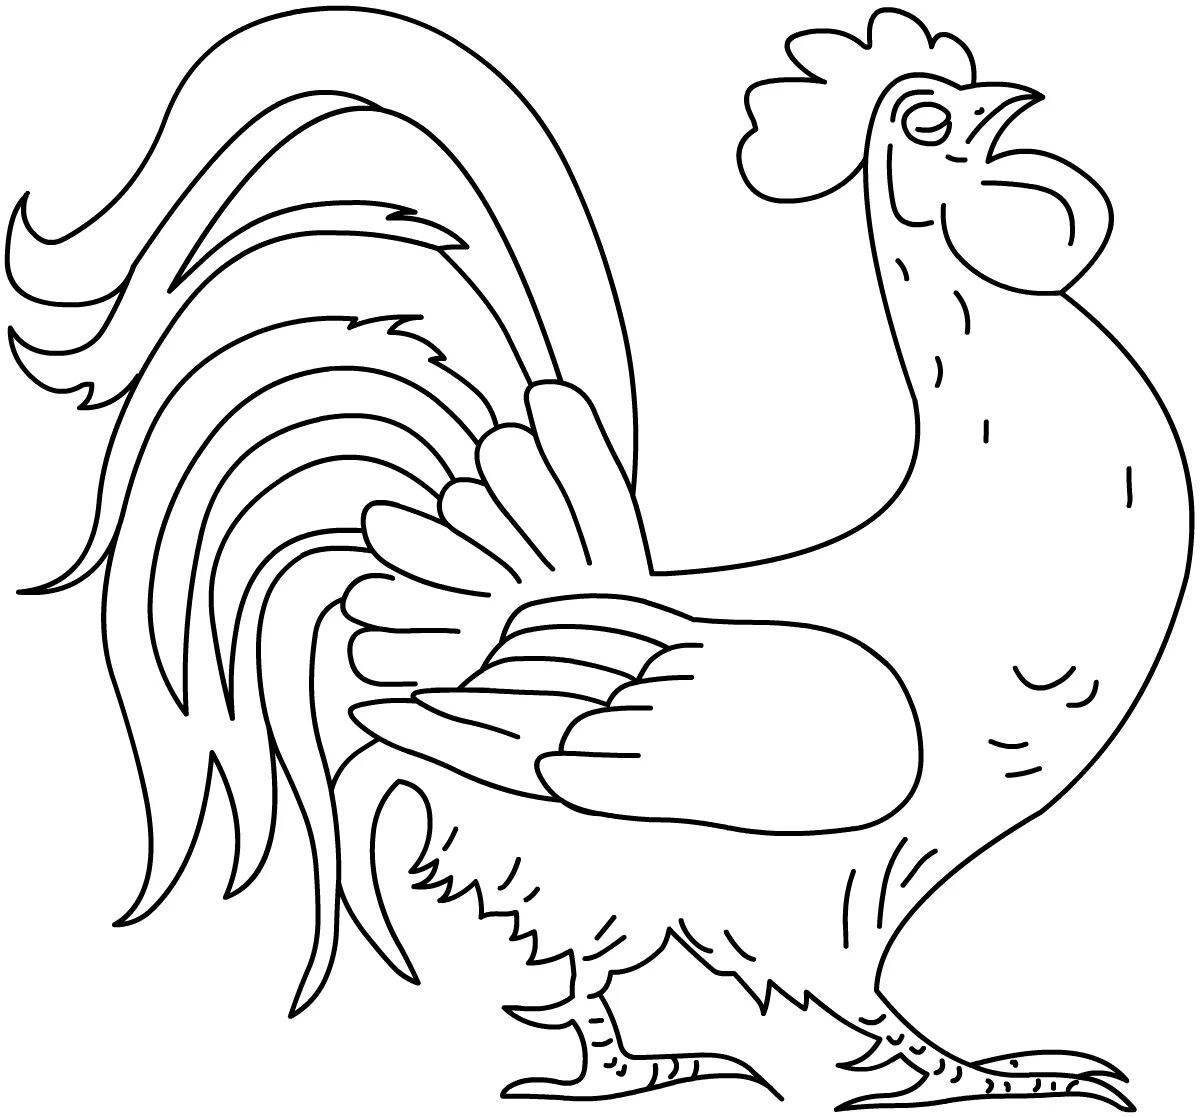 Coloring page energetic rooster for kids